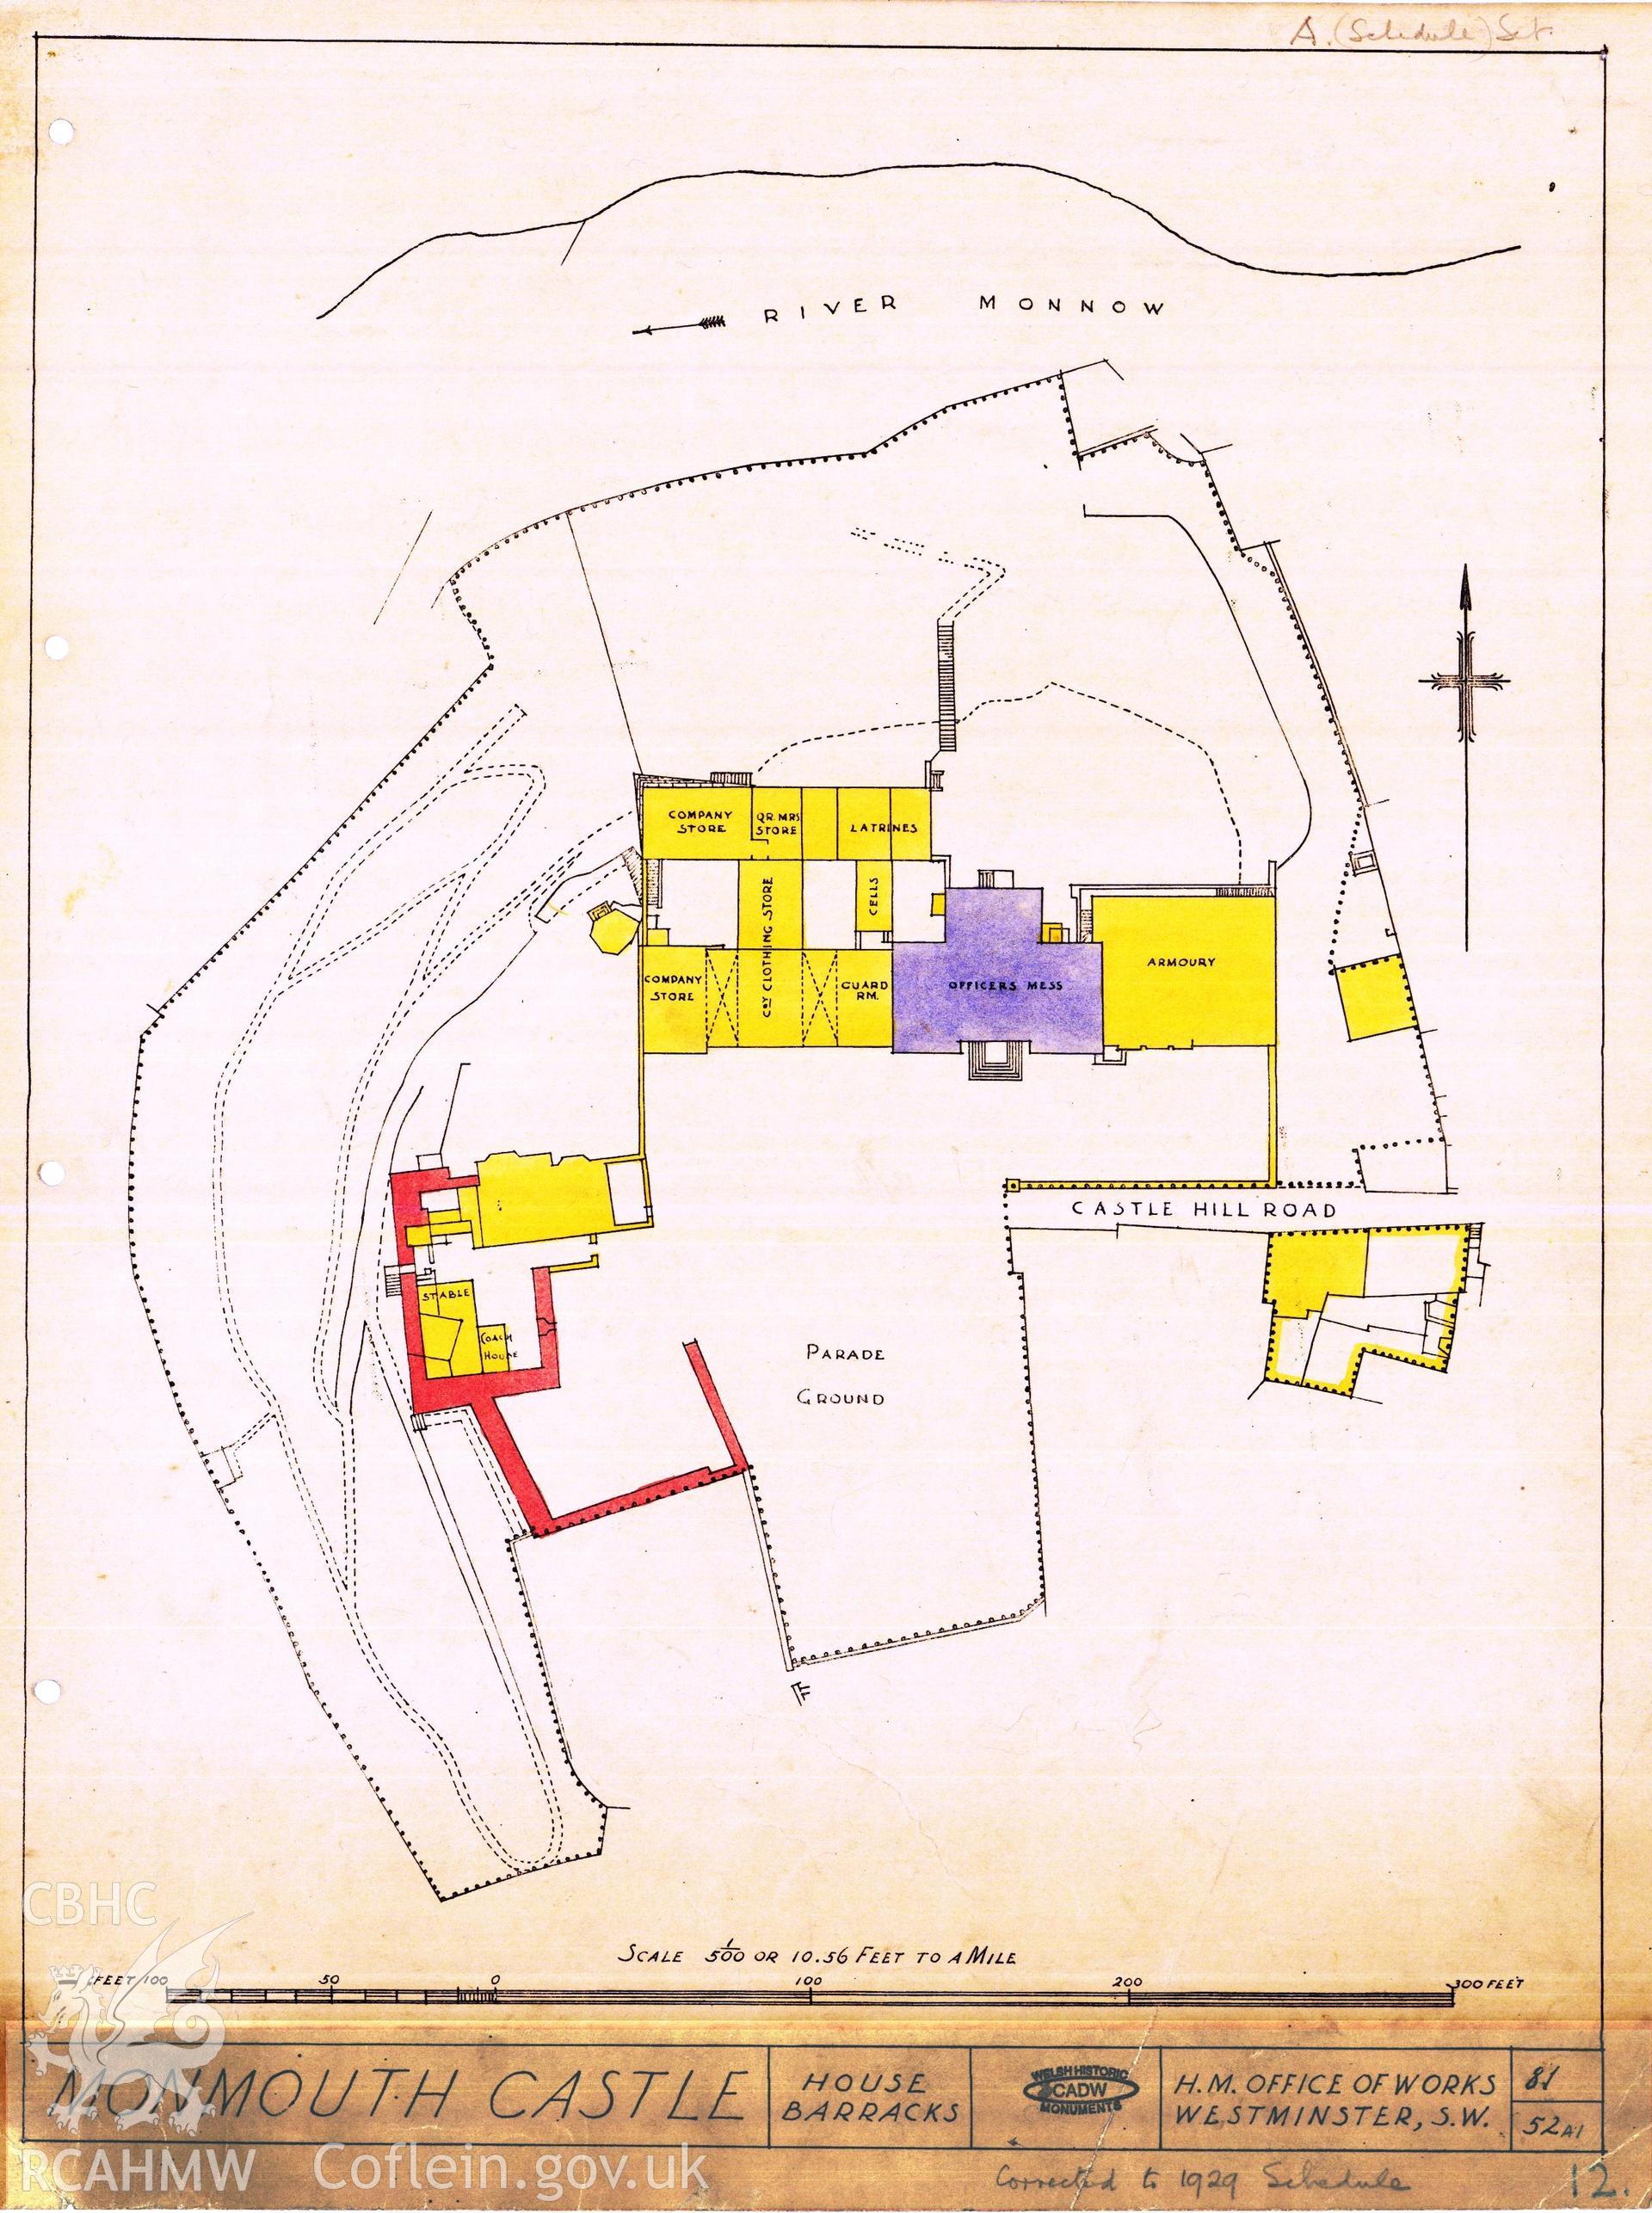 Cadw guardianship monument drawing of Monmouth Castle. Map showing House + Barracks. Cadw Ref. No:81/52A1. Scale 1:500.